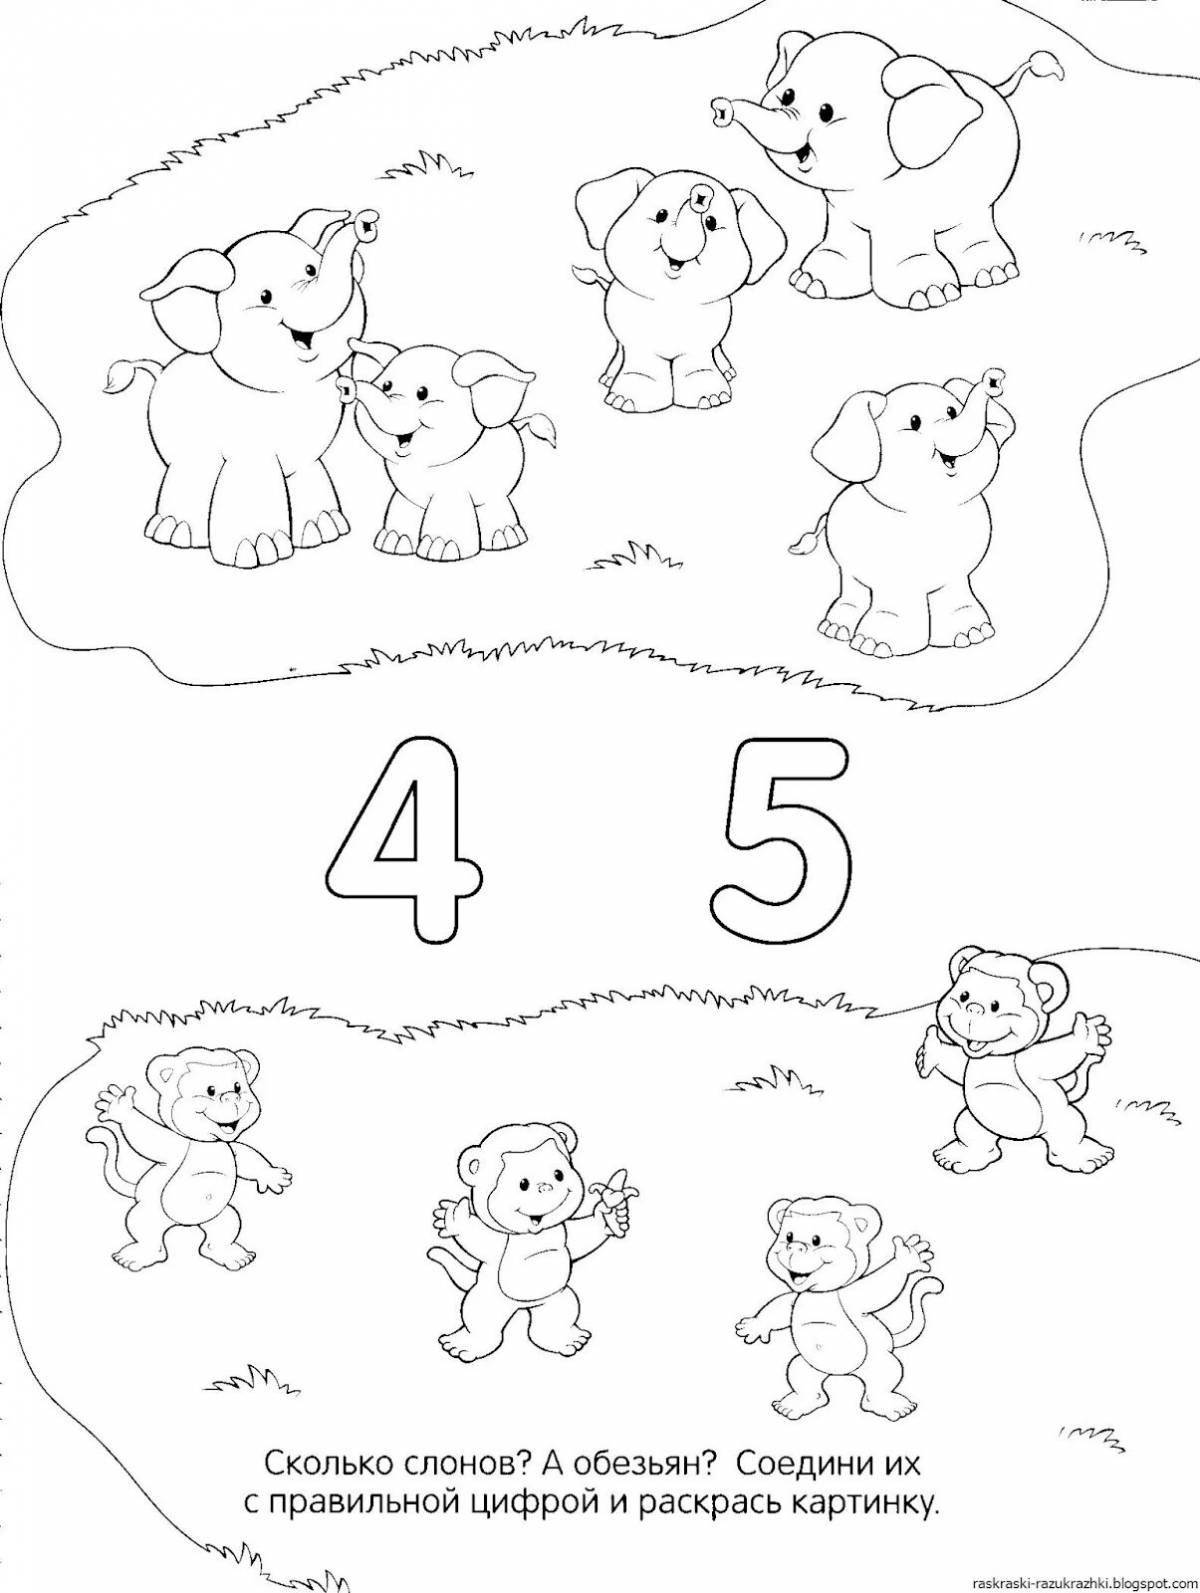 Live logical coloring for children 4-5 years old